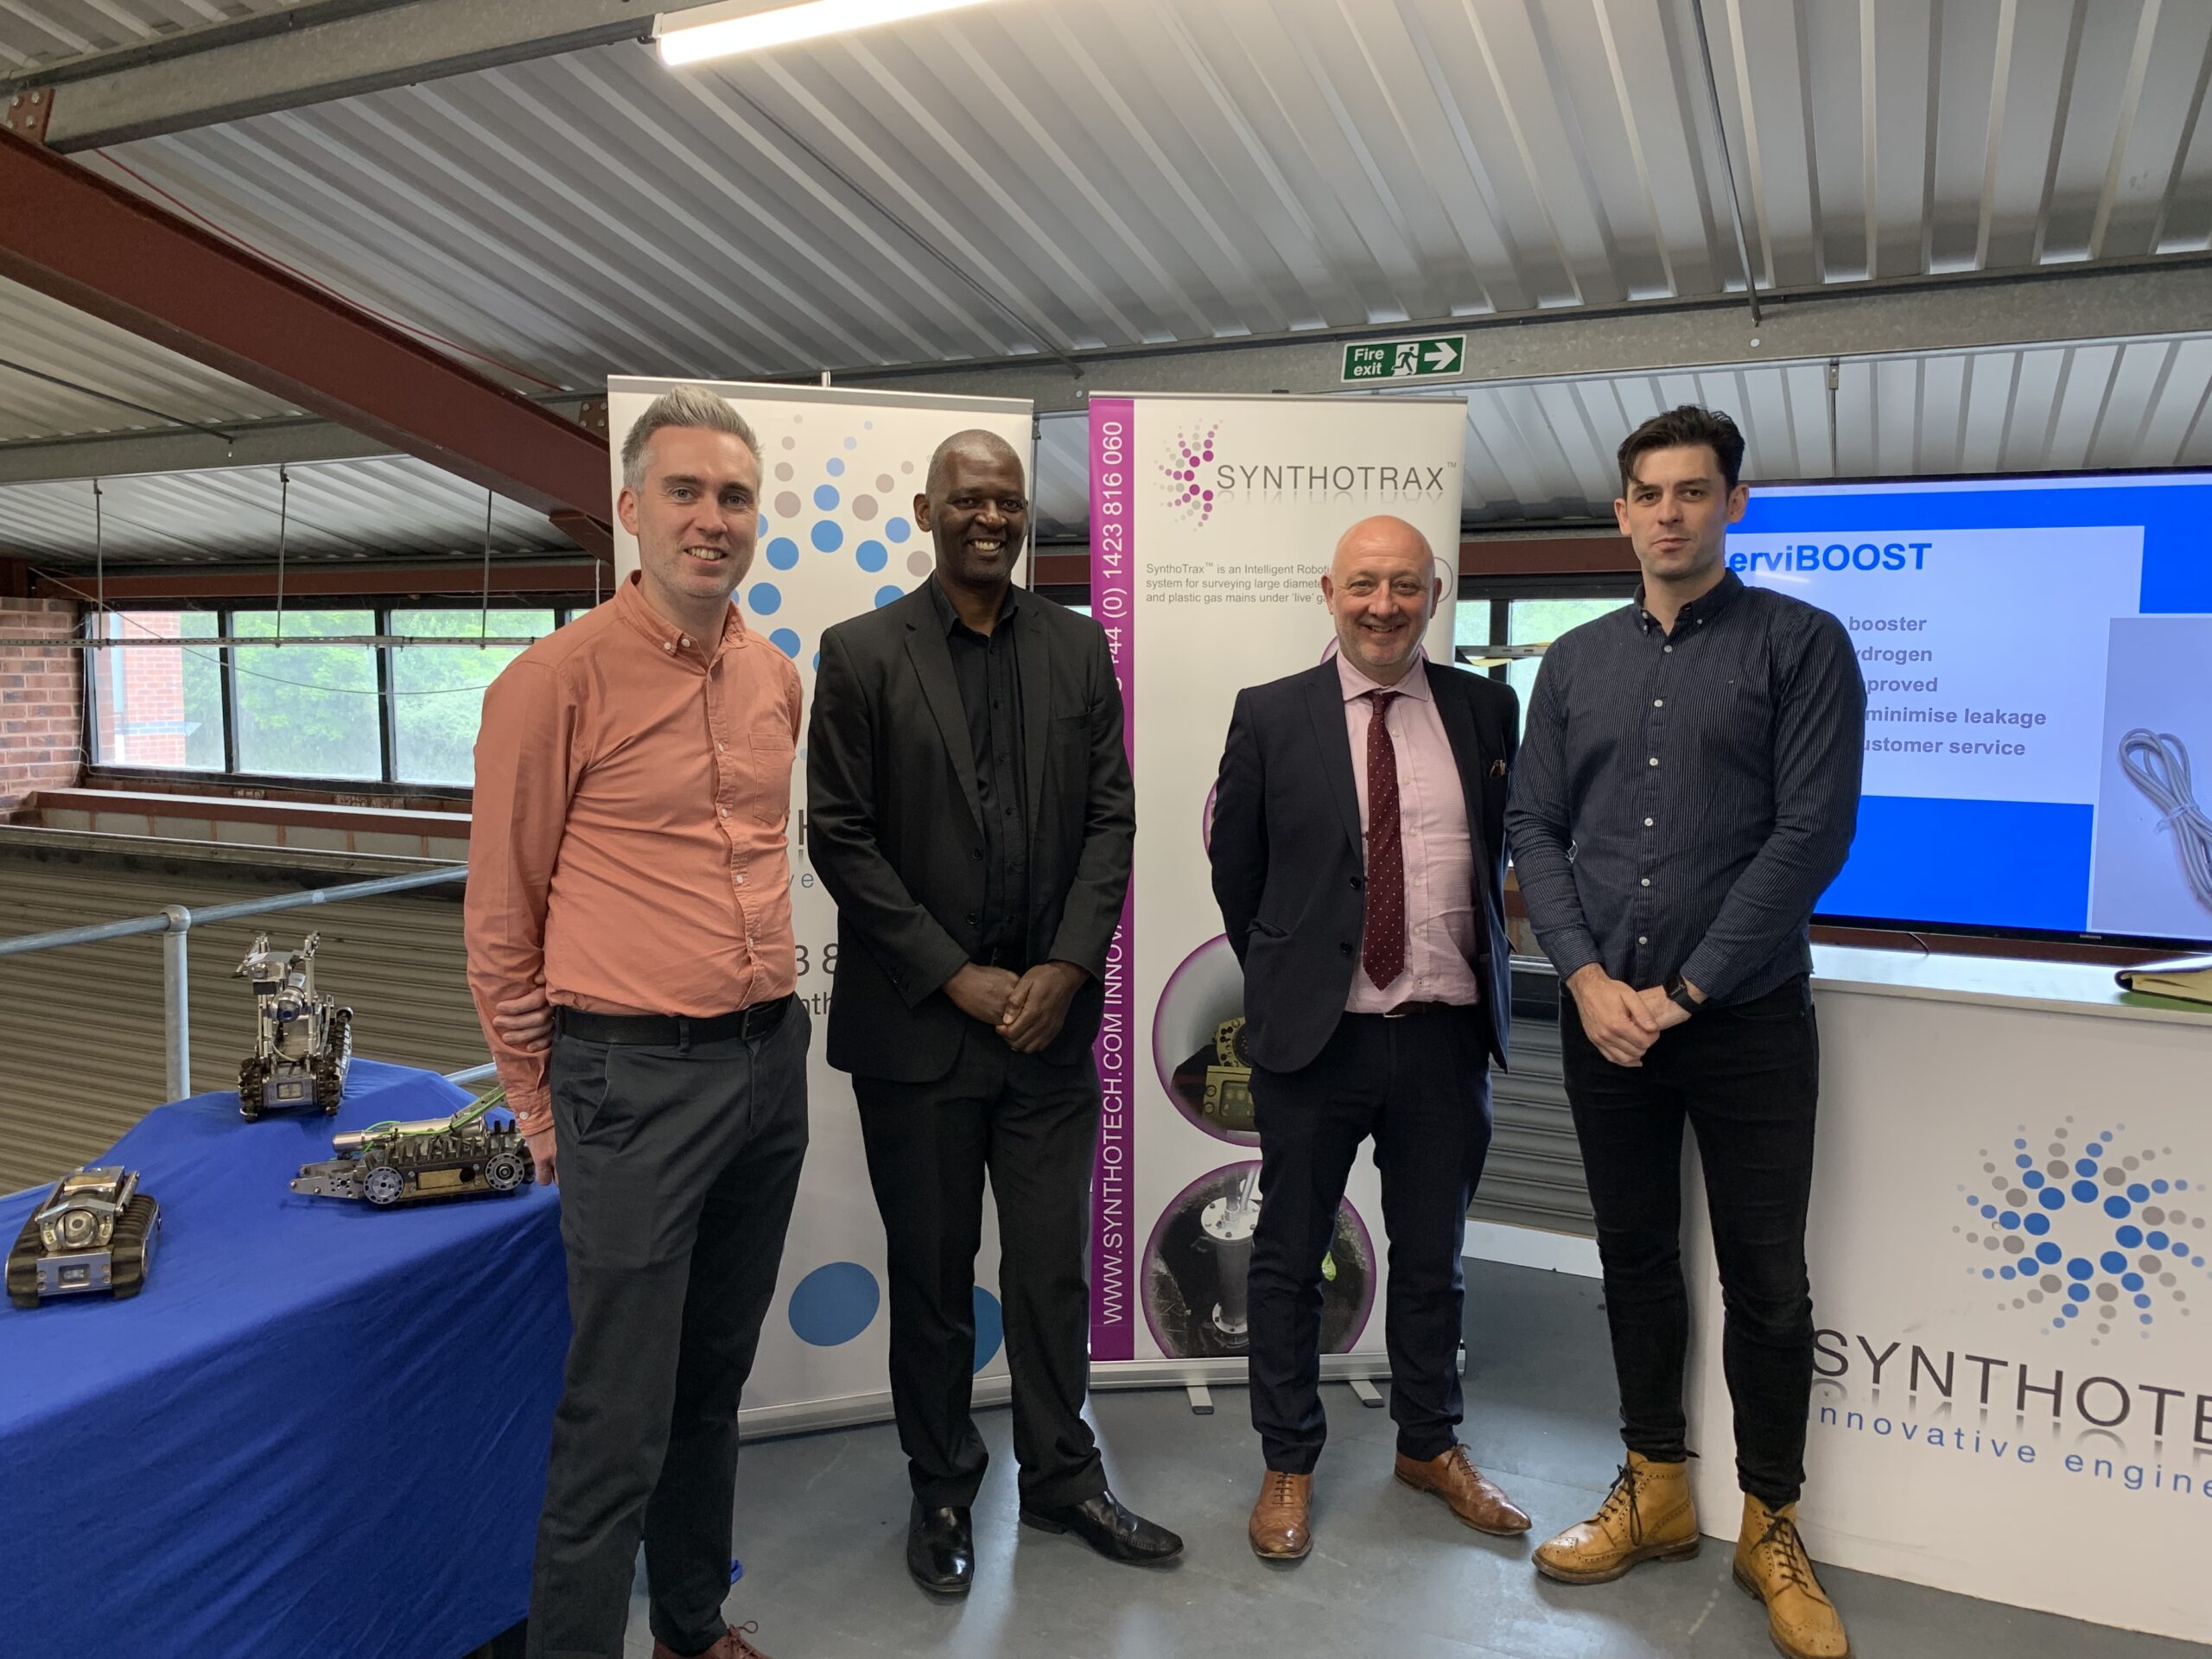 Synthotech visit from harrogate council executives